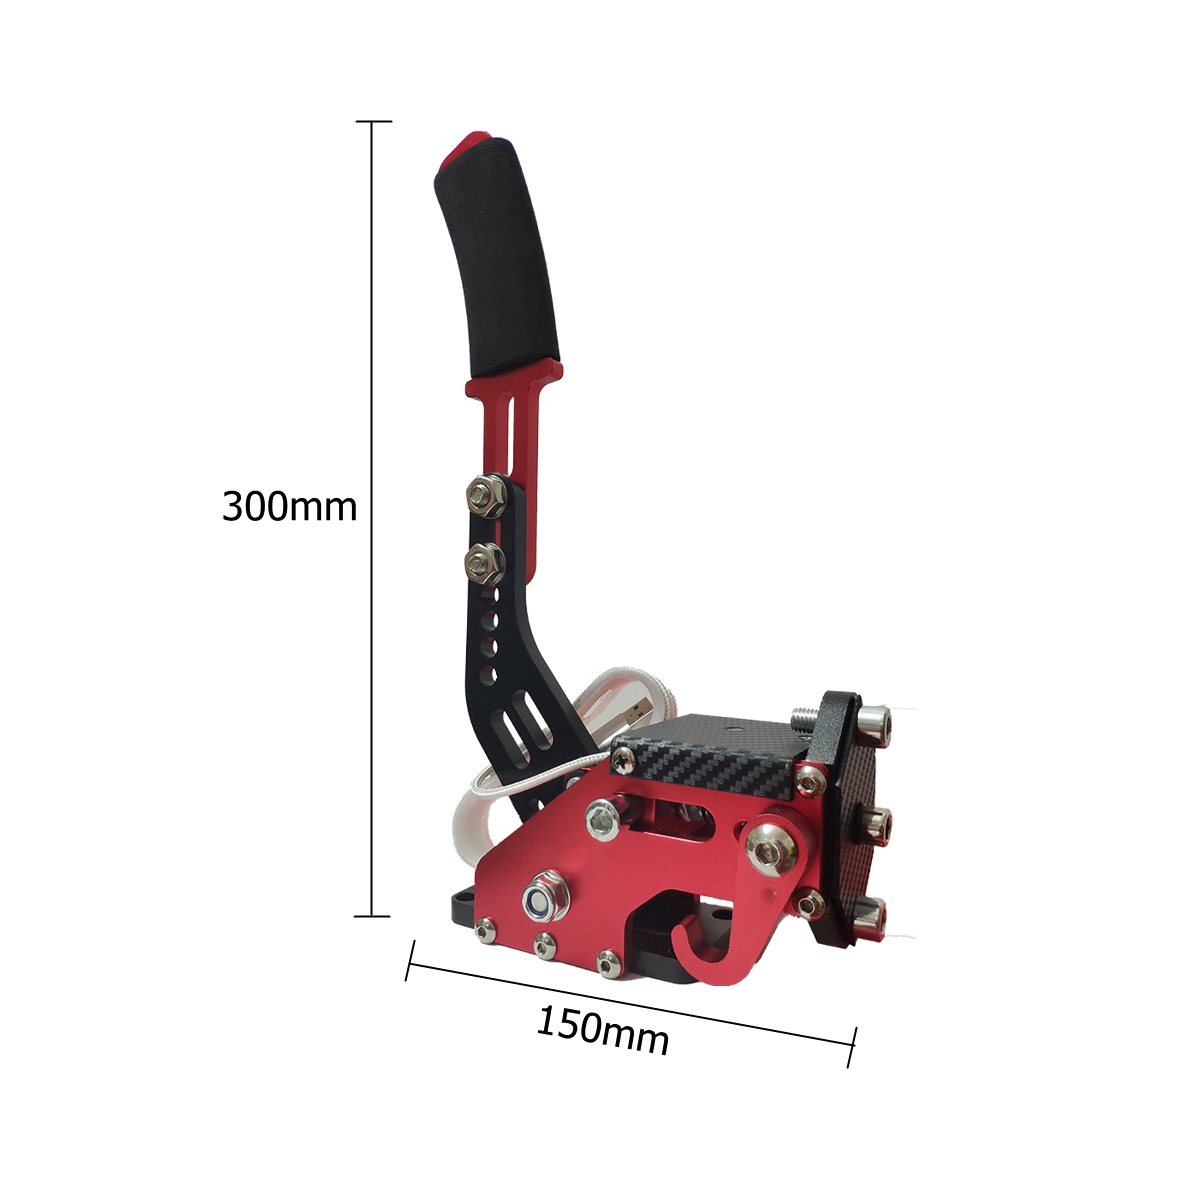 14Bit-PC-USB-Handbrake-Hydraulic-Lever-SIM-Without-Clamp-For-Racing-Games-G252729-T500-FANATECOSW-DI-1470117